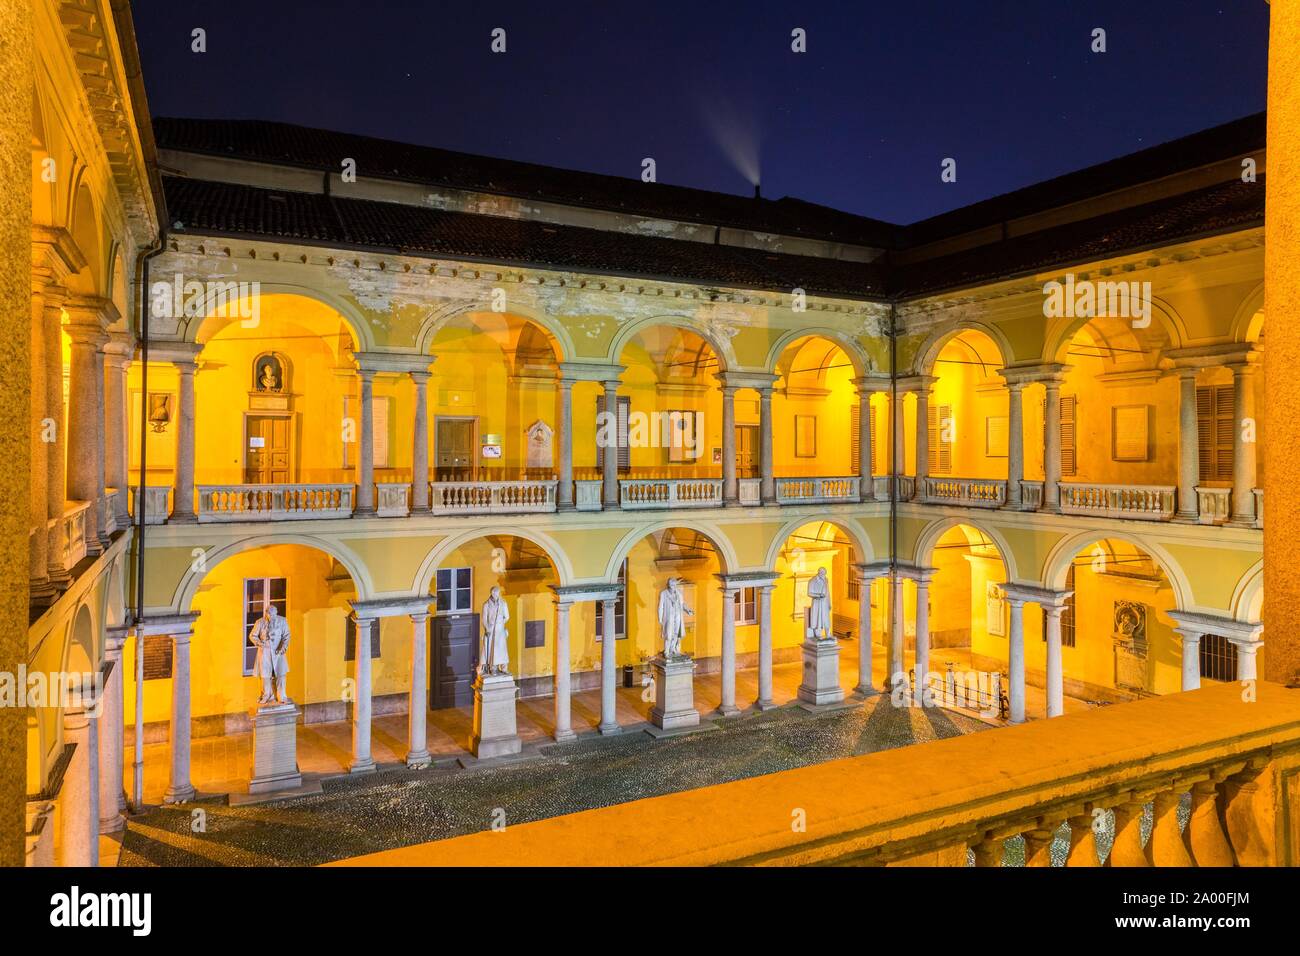 Illuminated courtyard with loggia and sculptures, University of Pavia, night scene, Pavia, Lombardy, Italy Stock Photo